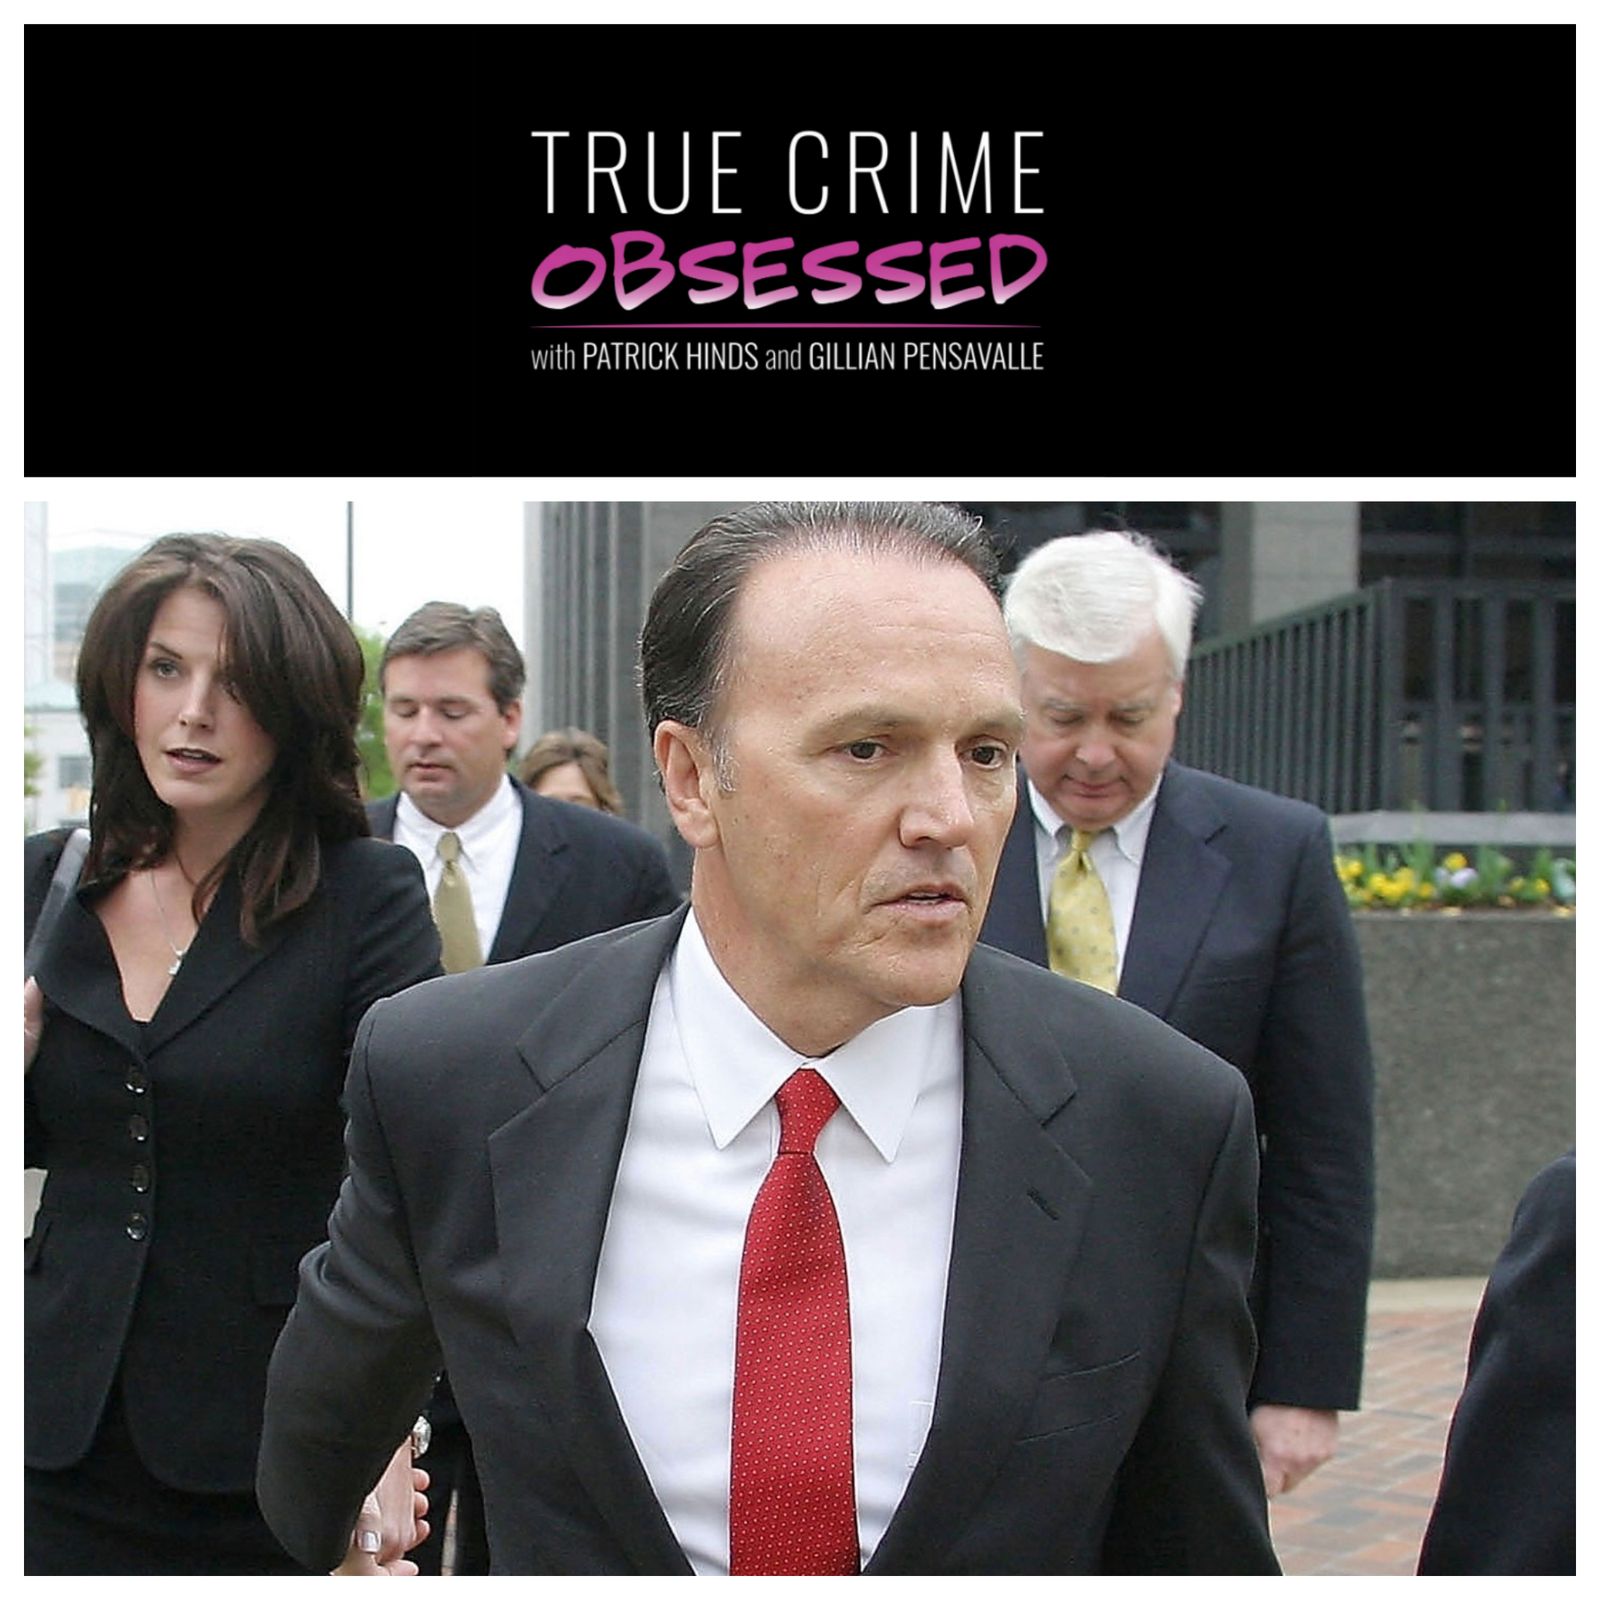 143: King Richard (Trial By Media Episode 4) by True Crime Obsessed